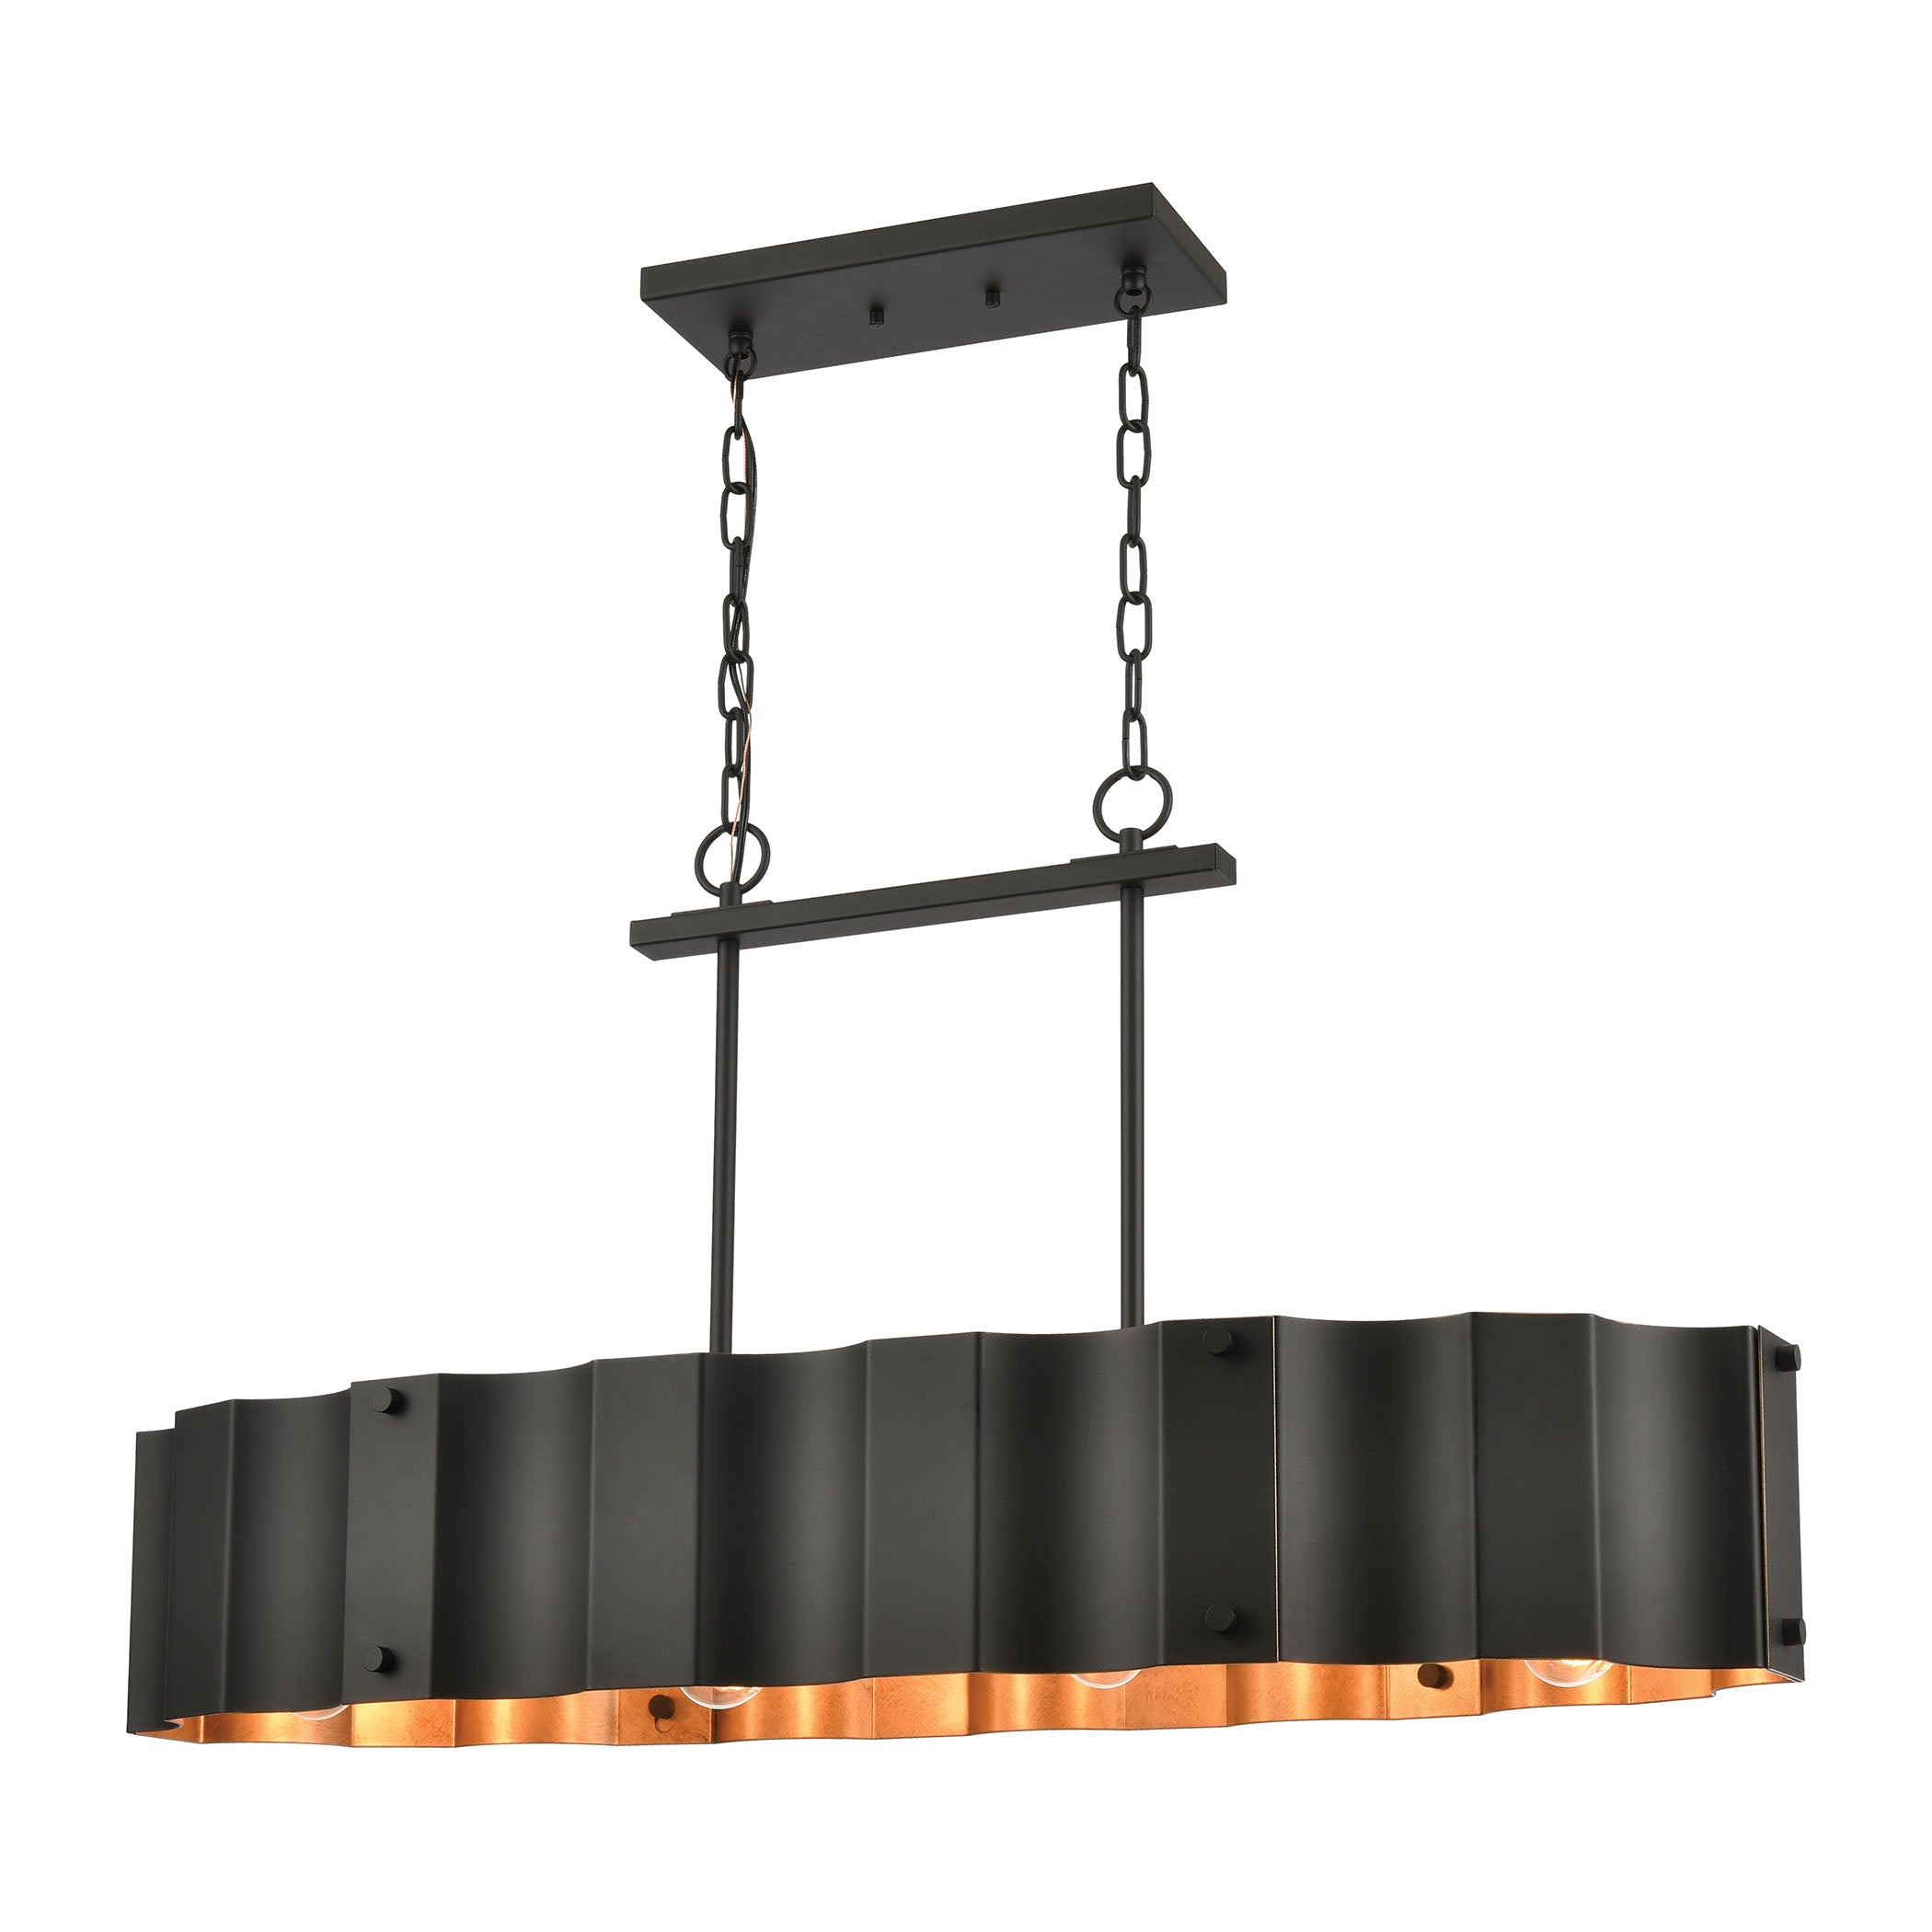 ELK Lighting 89078/4 Clausten 4-Light Island Light in Black and Gold with Black Metal Shade